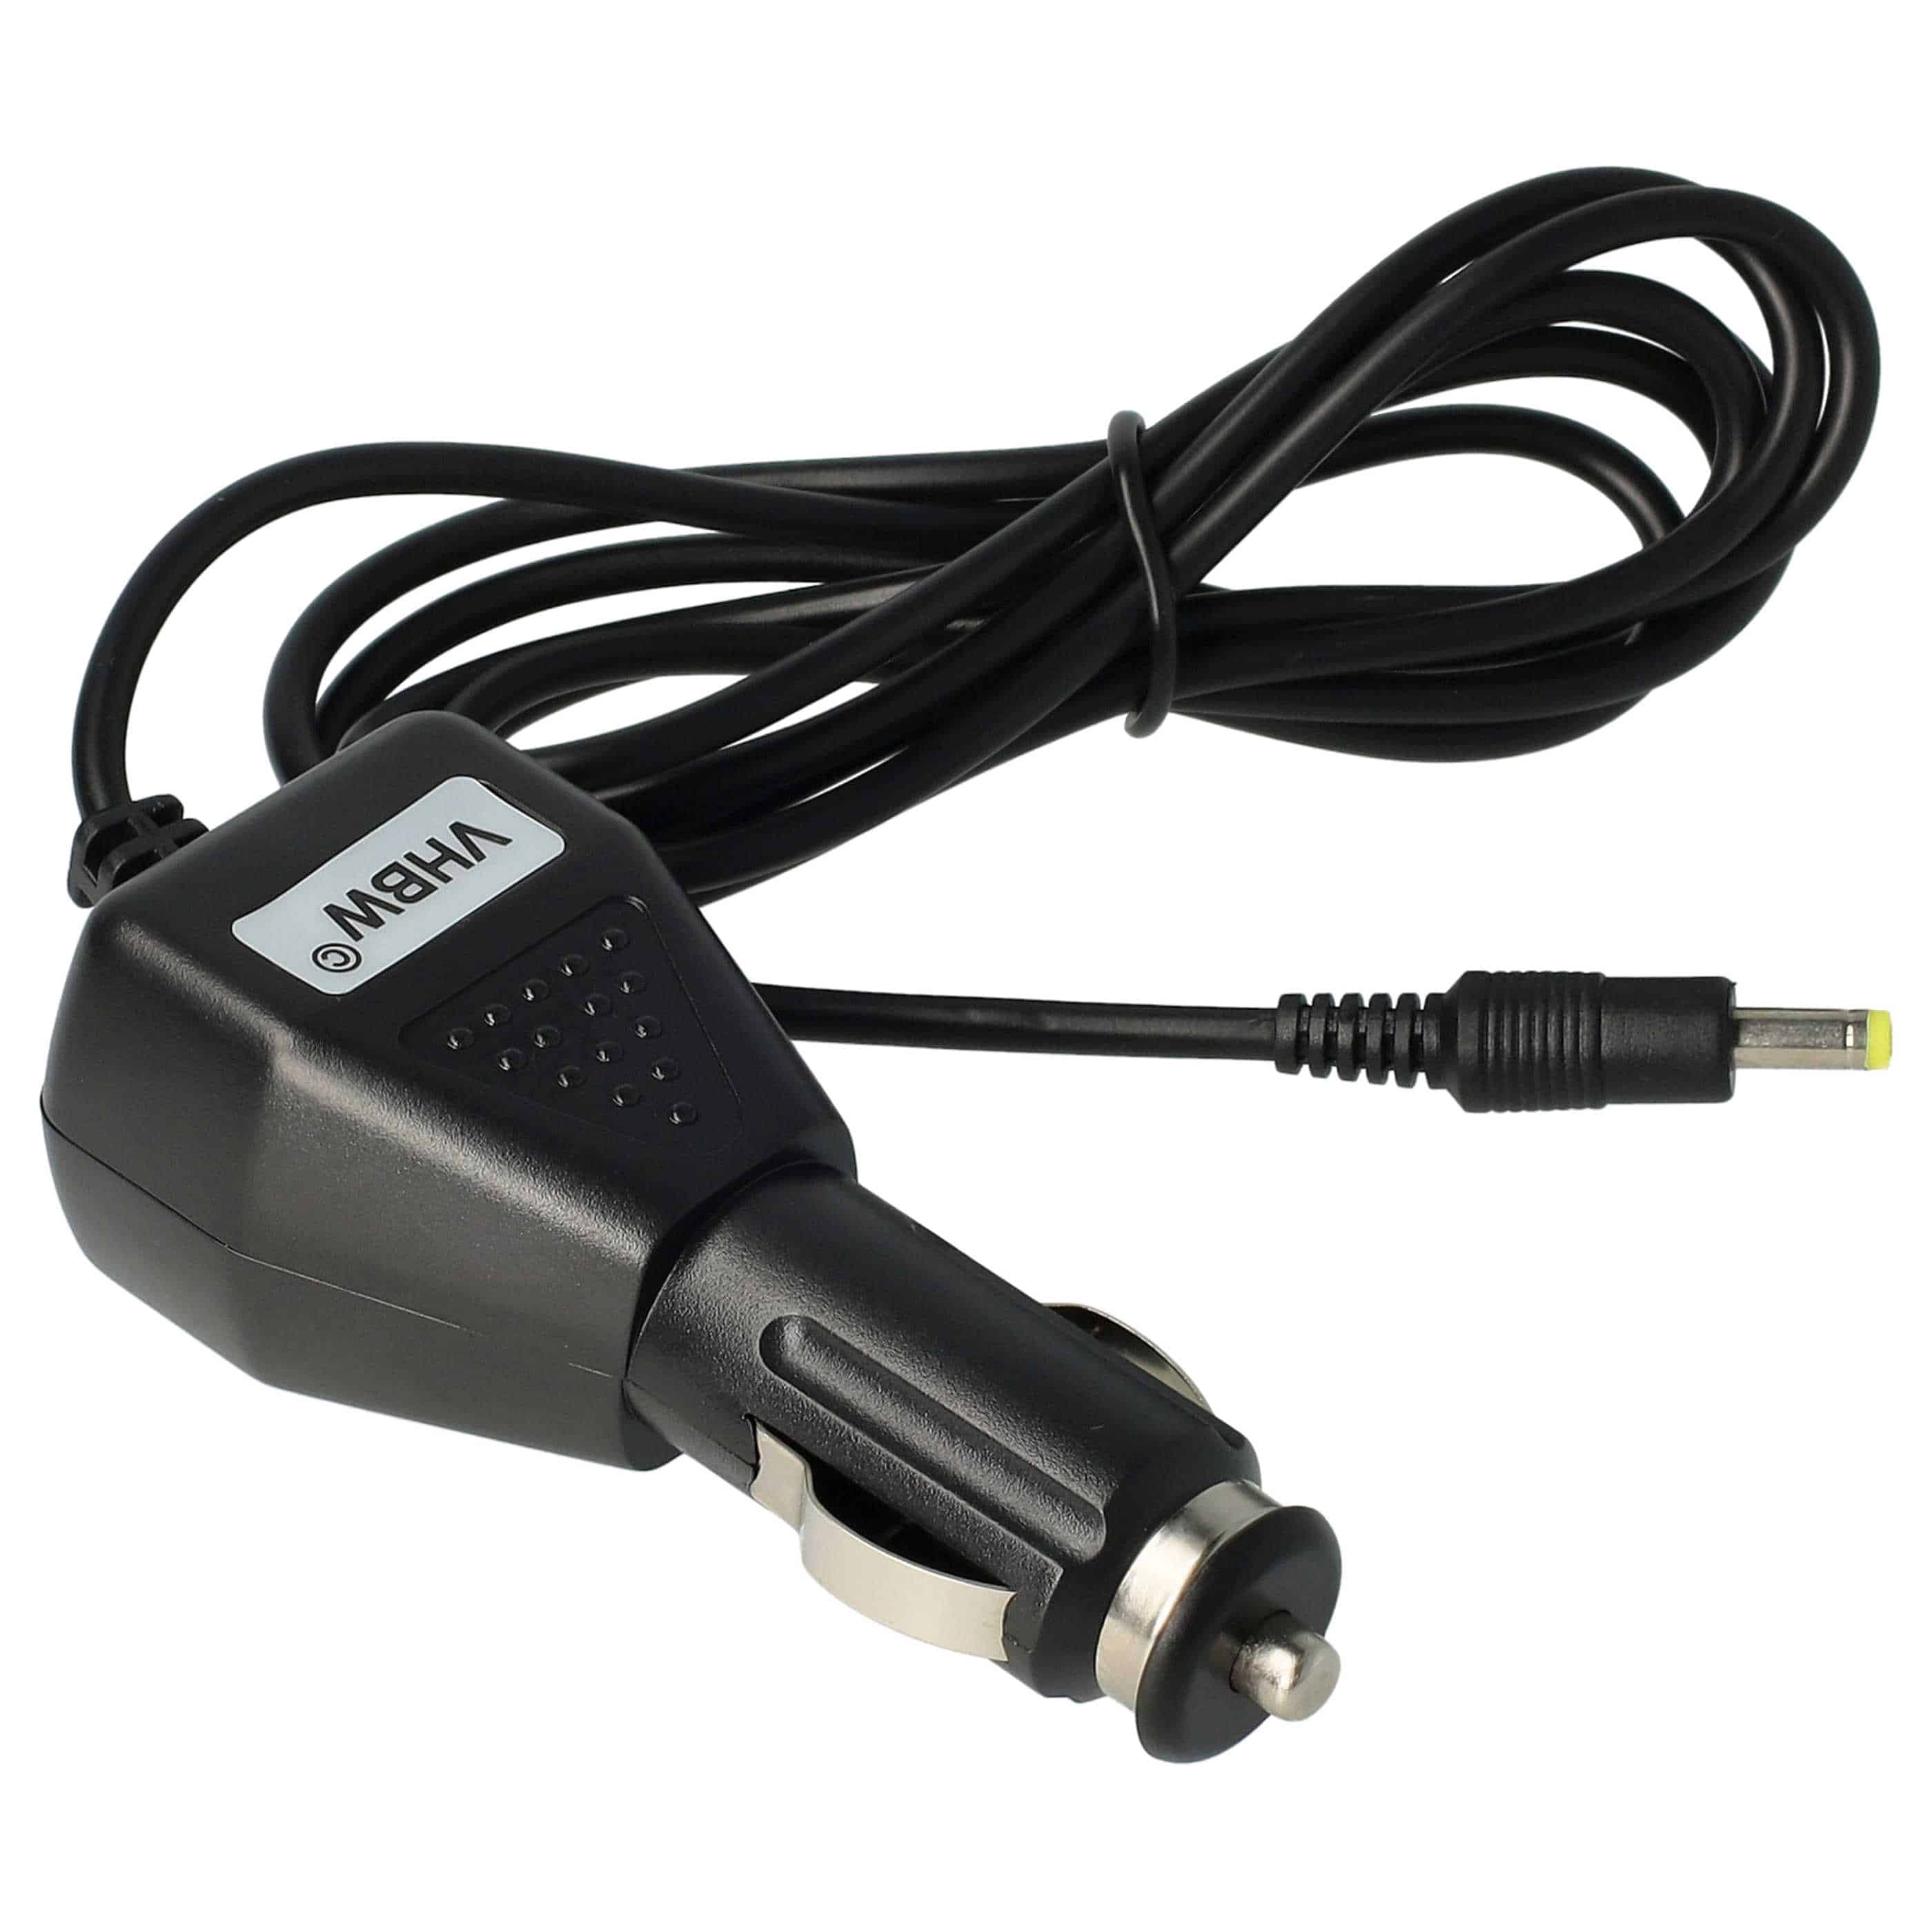 Cable coche reemplaza Philips 314011833821 para reproductor DVD Philips - Cargador 12 V